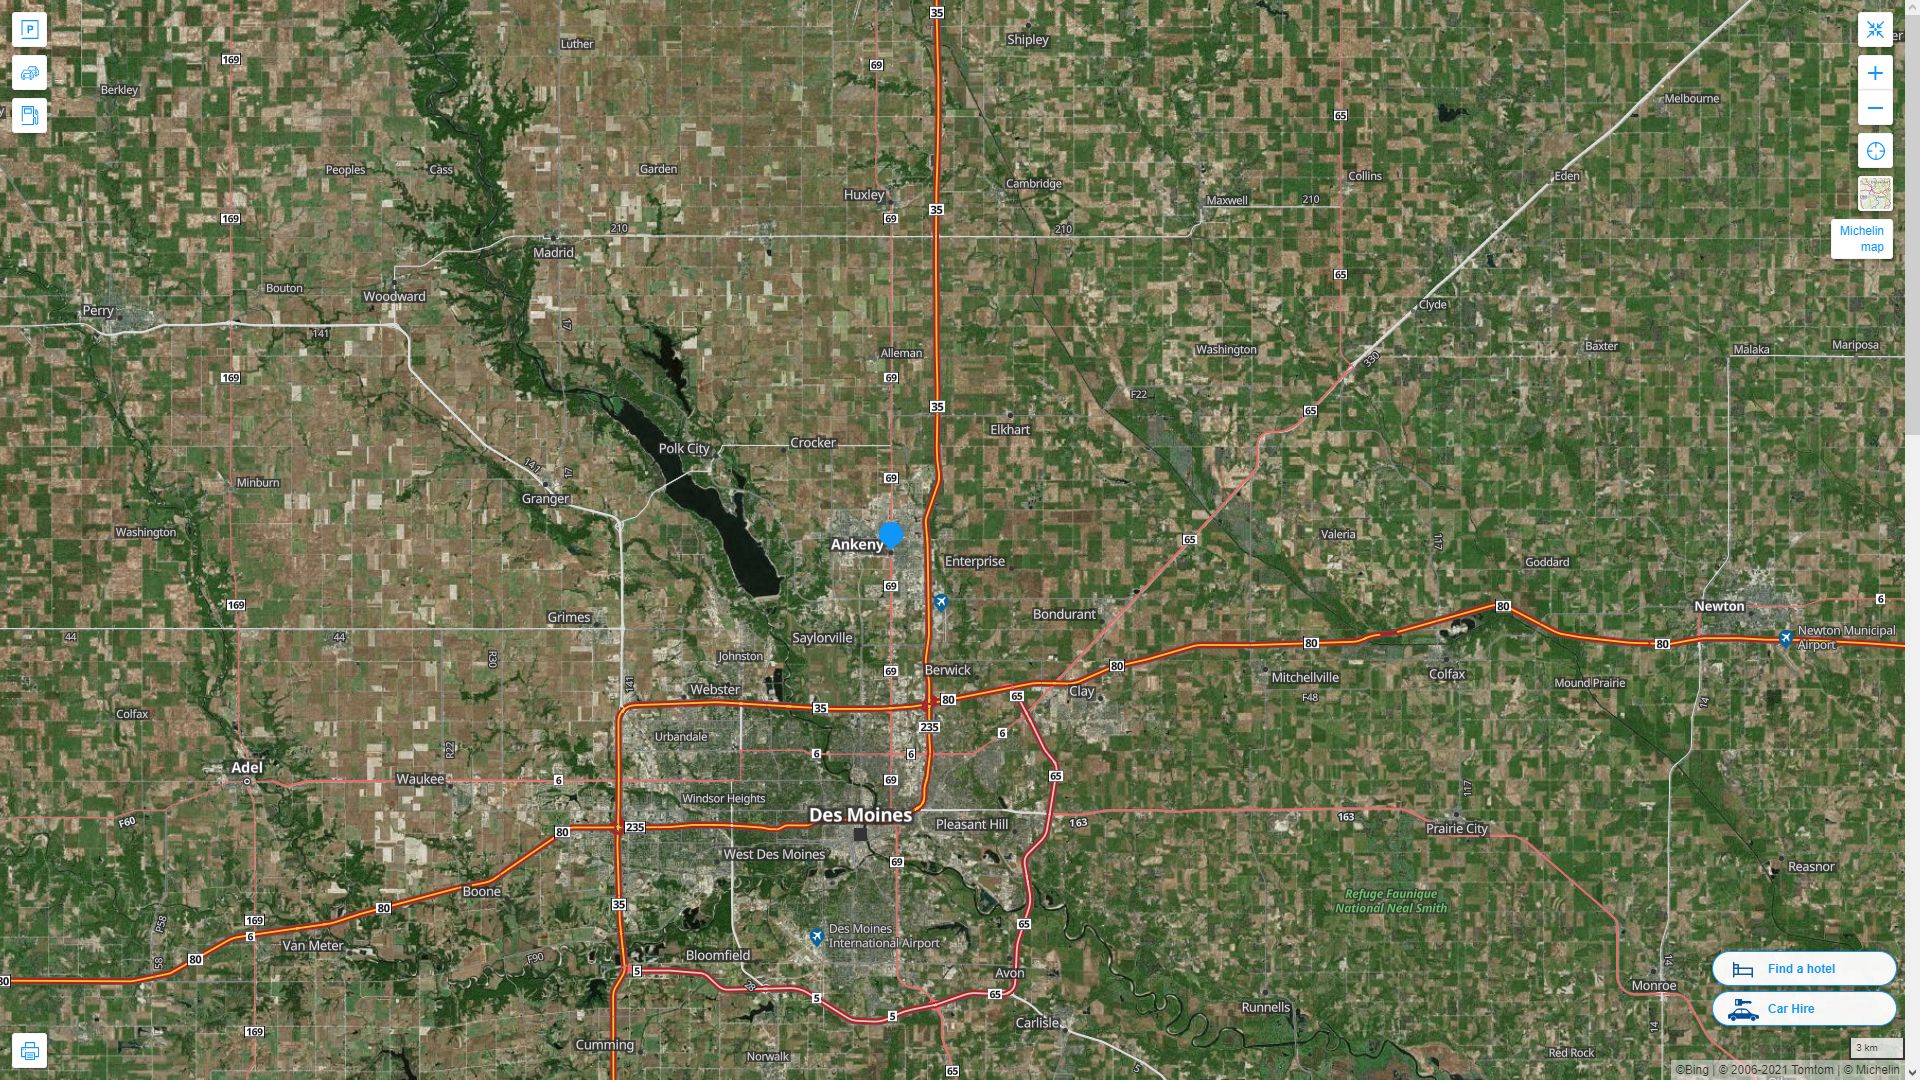 Ankeny iowa Highway and Road Map with Satellite View